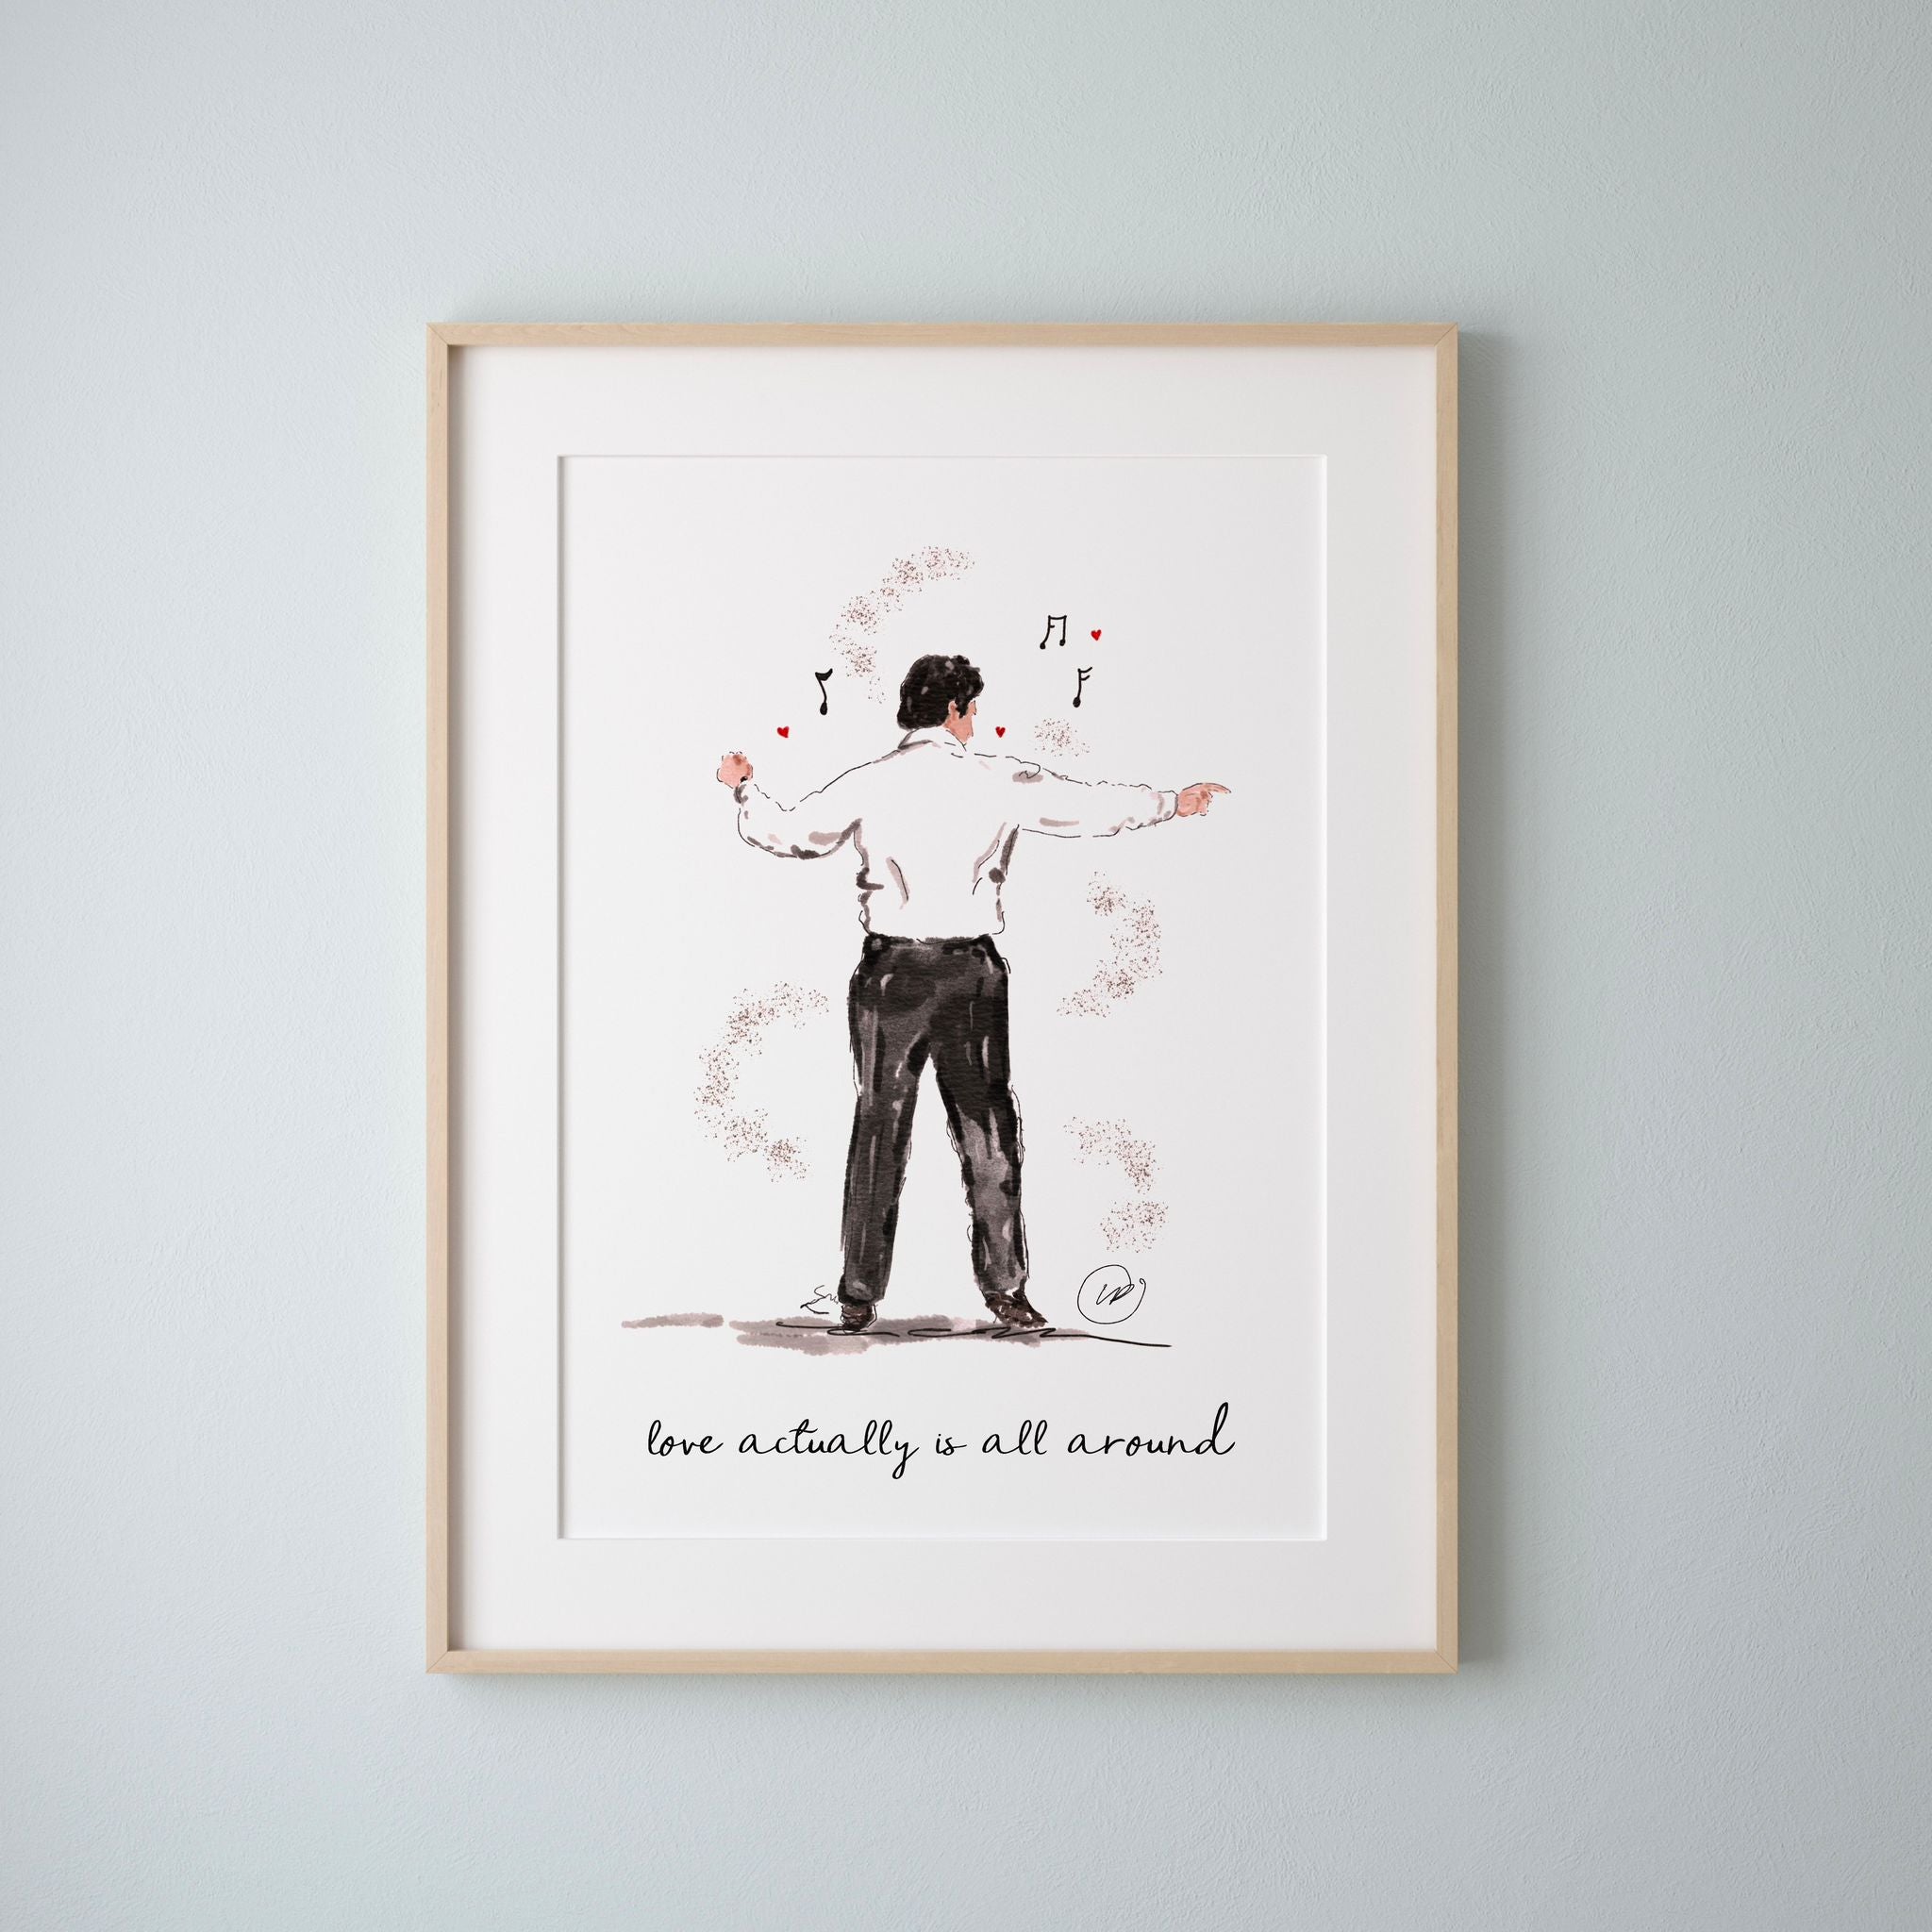 Love Actually Prime Minister Dance Print